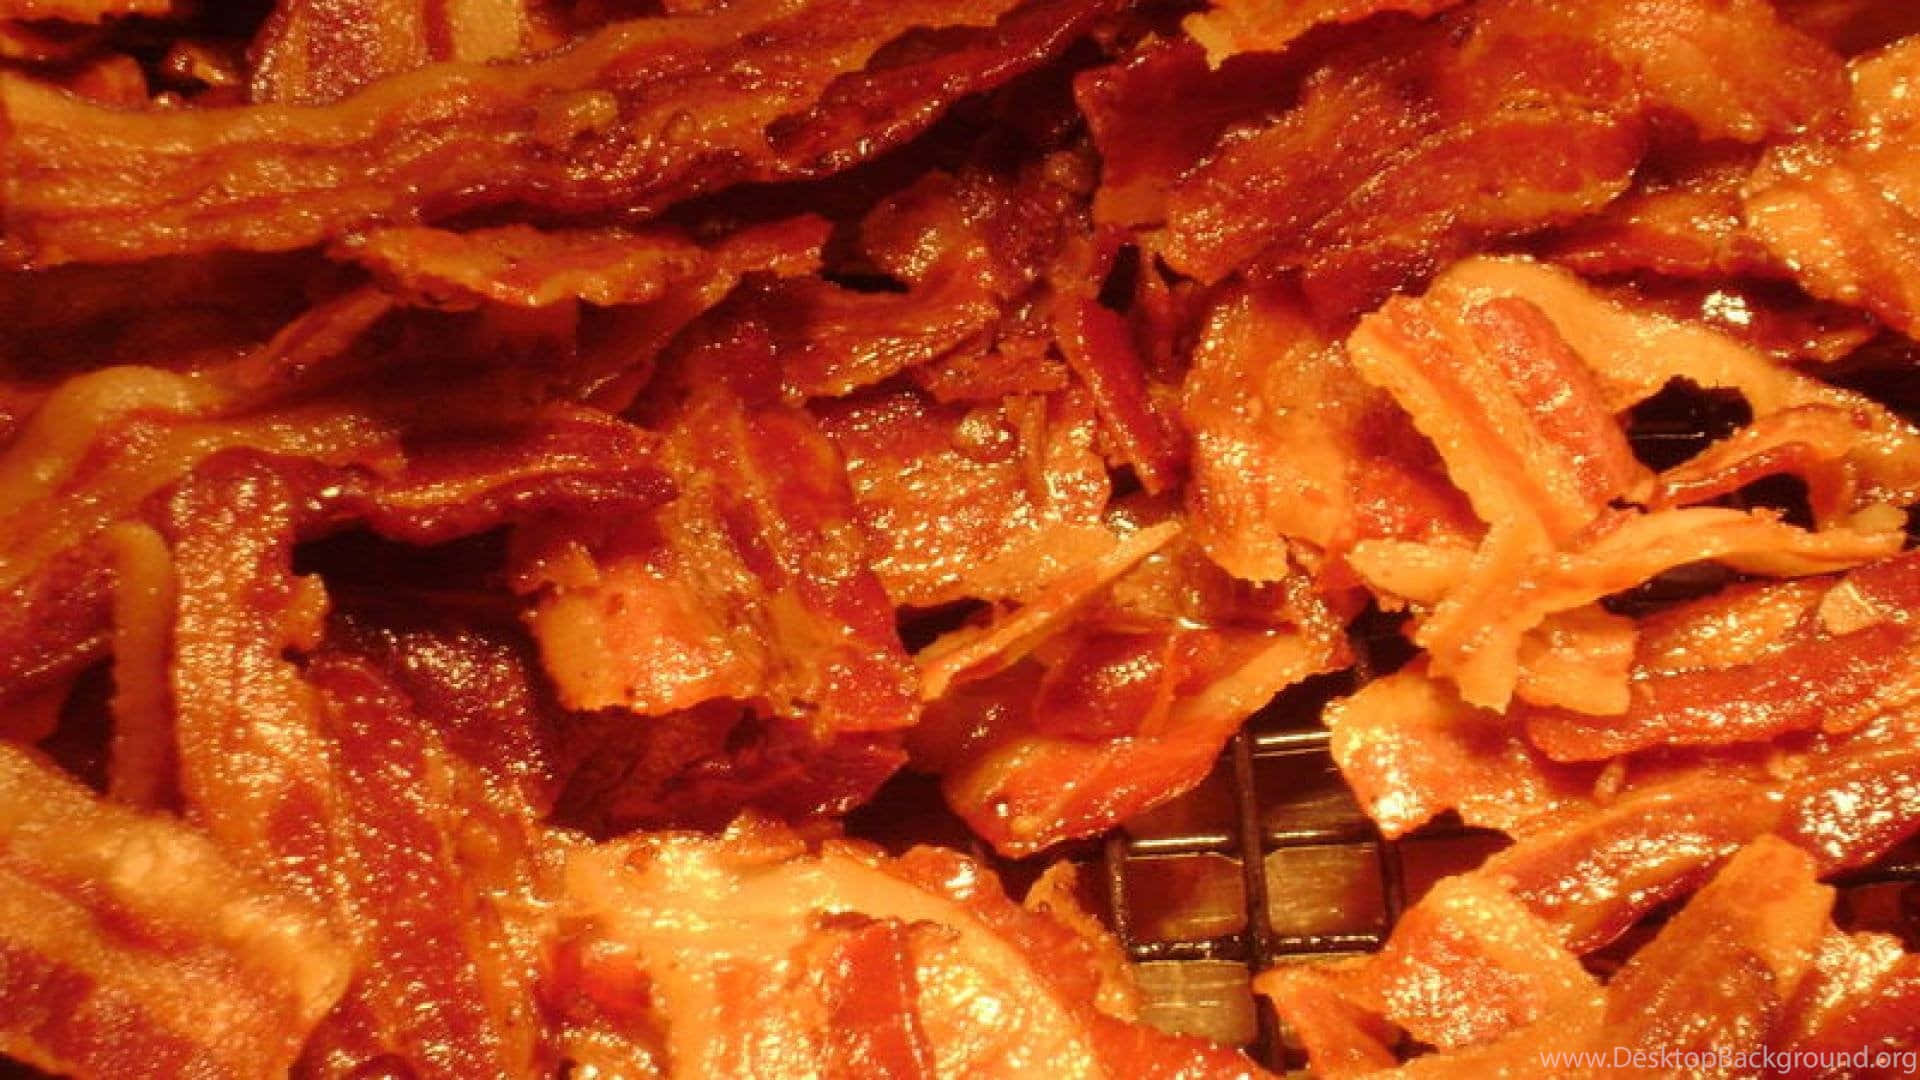 Enjoying a delicious slice of bacon for breakfast!